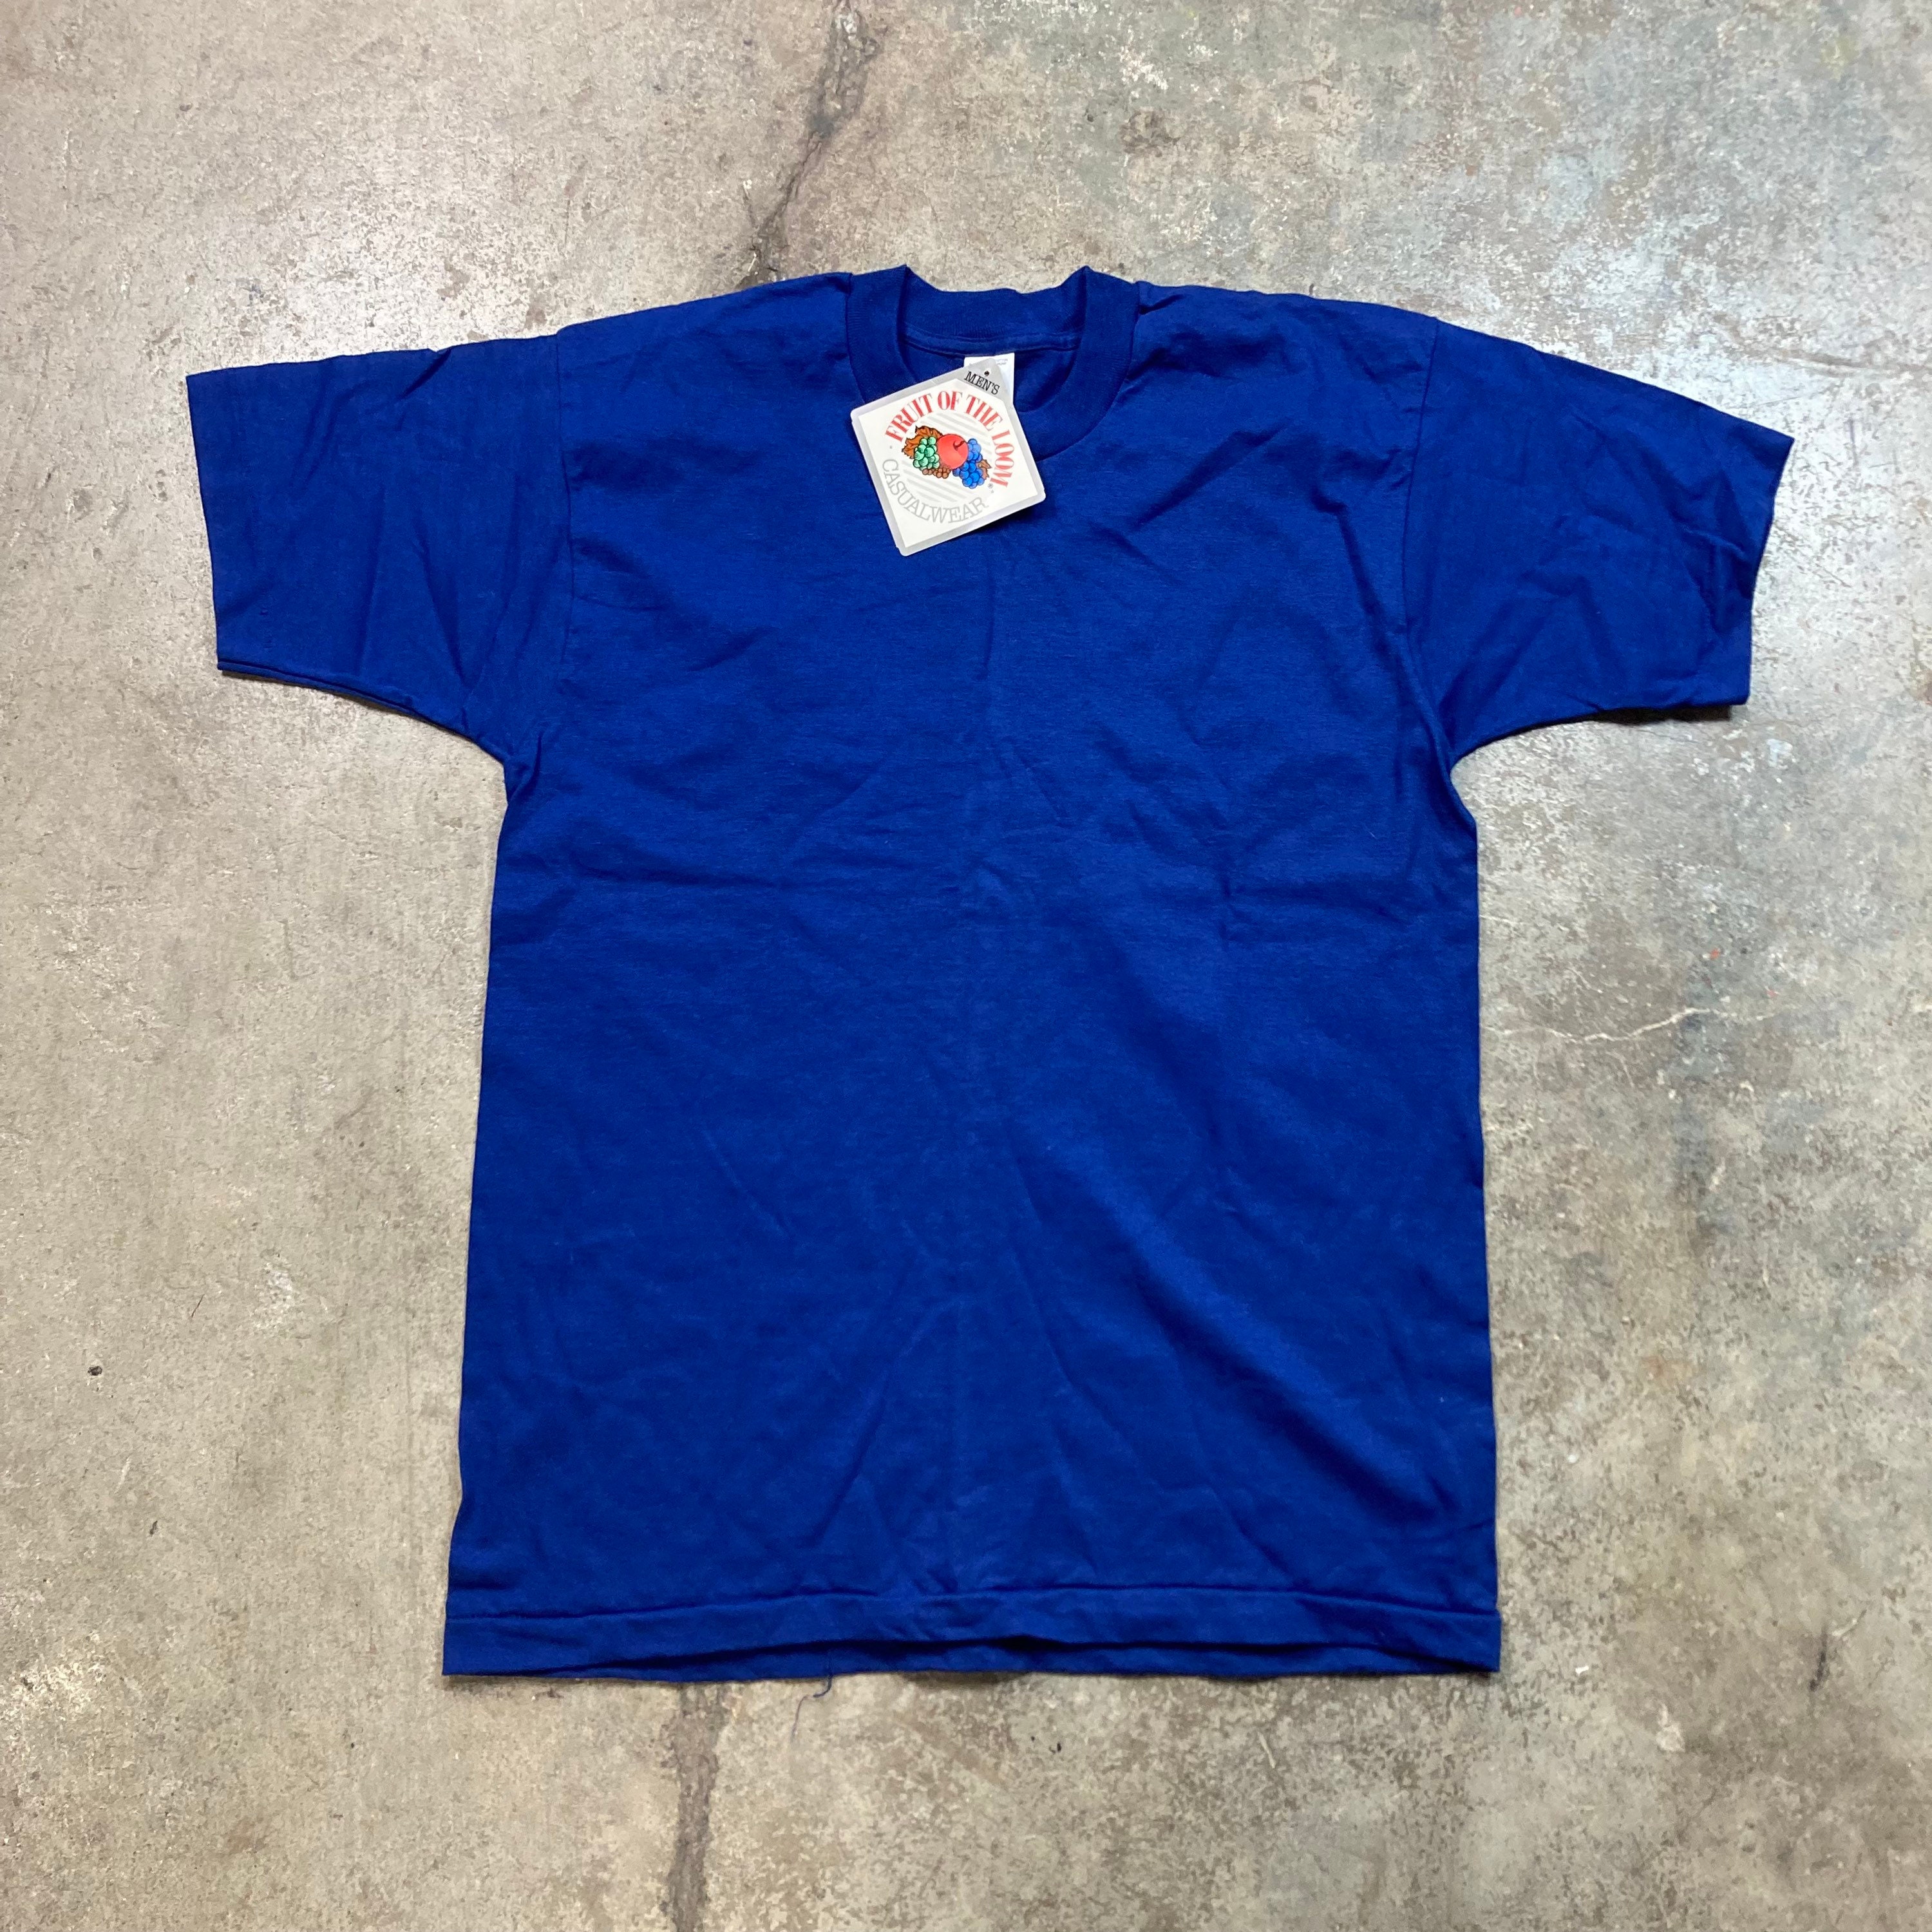 VINTAGE Fruit of the Loom NOS T-SHIRT Blank Blue Adult Mens XXL USA Made 80s 90s 